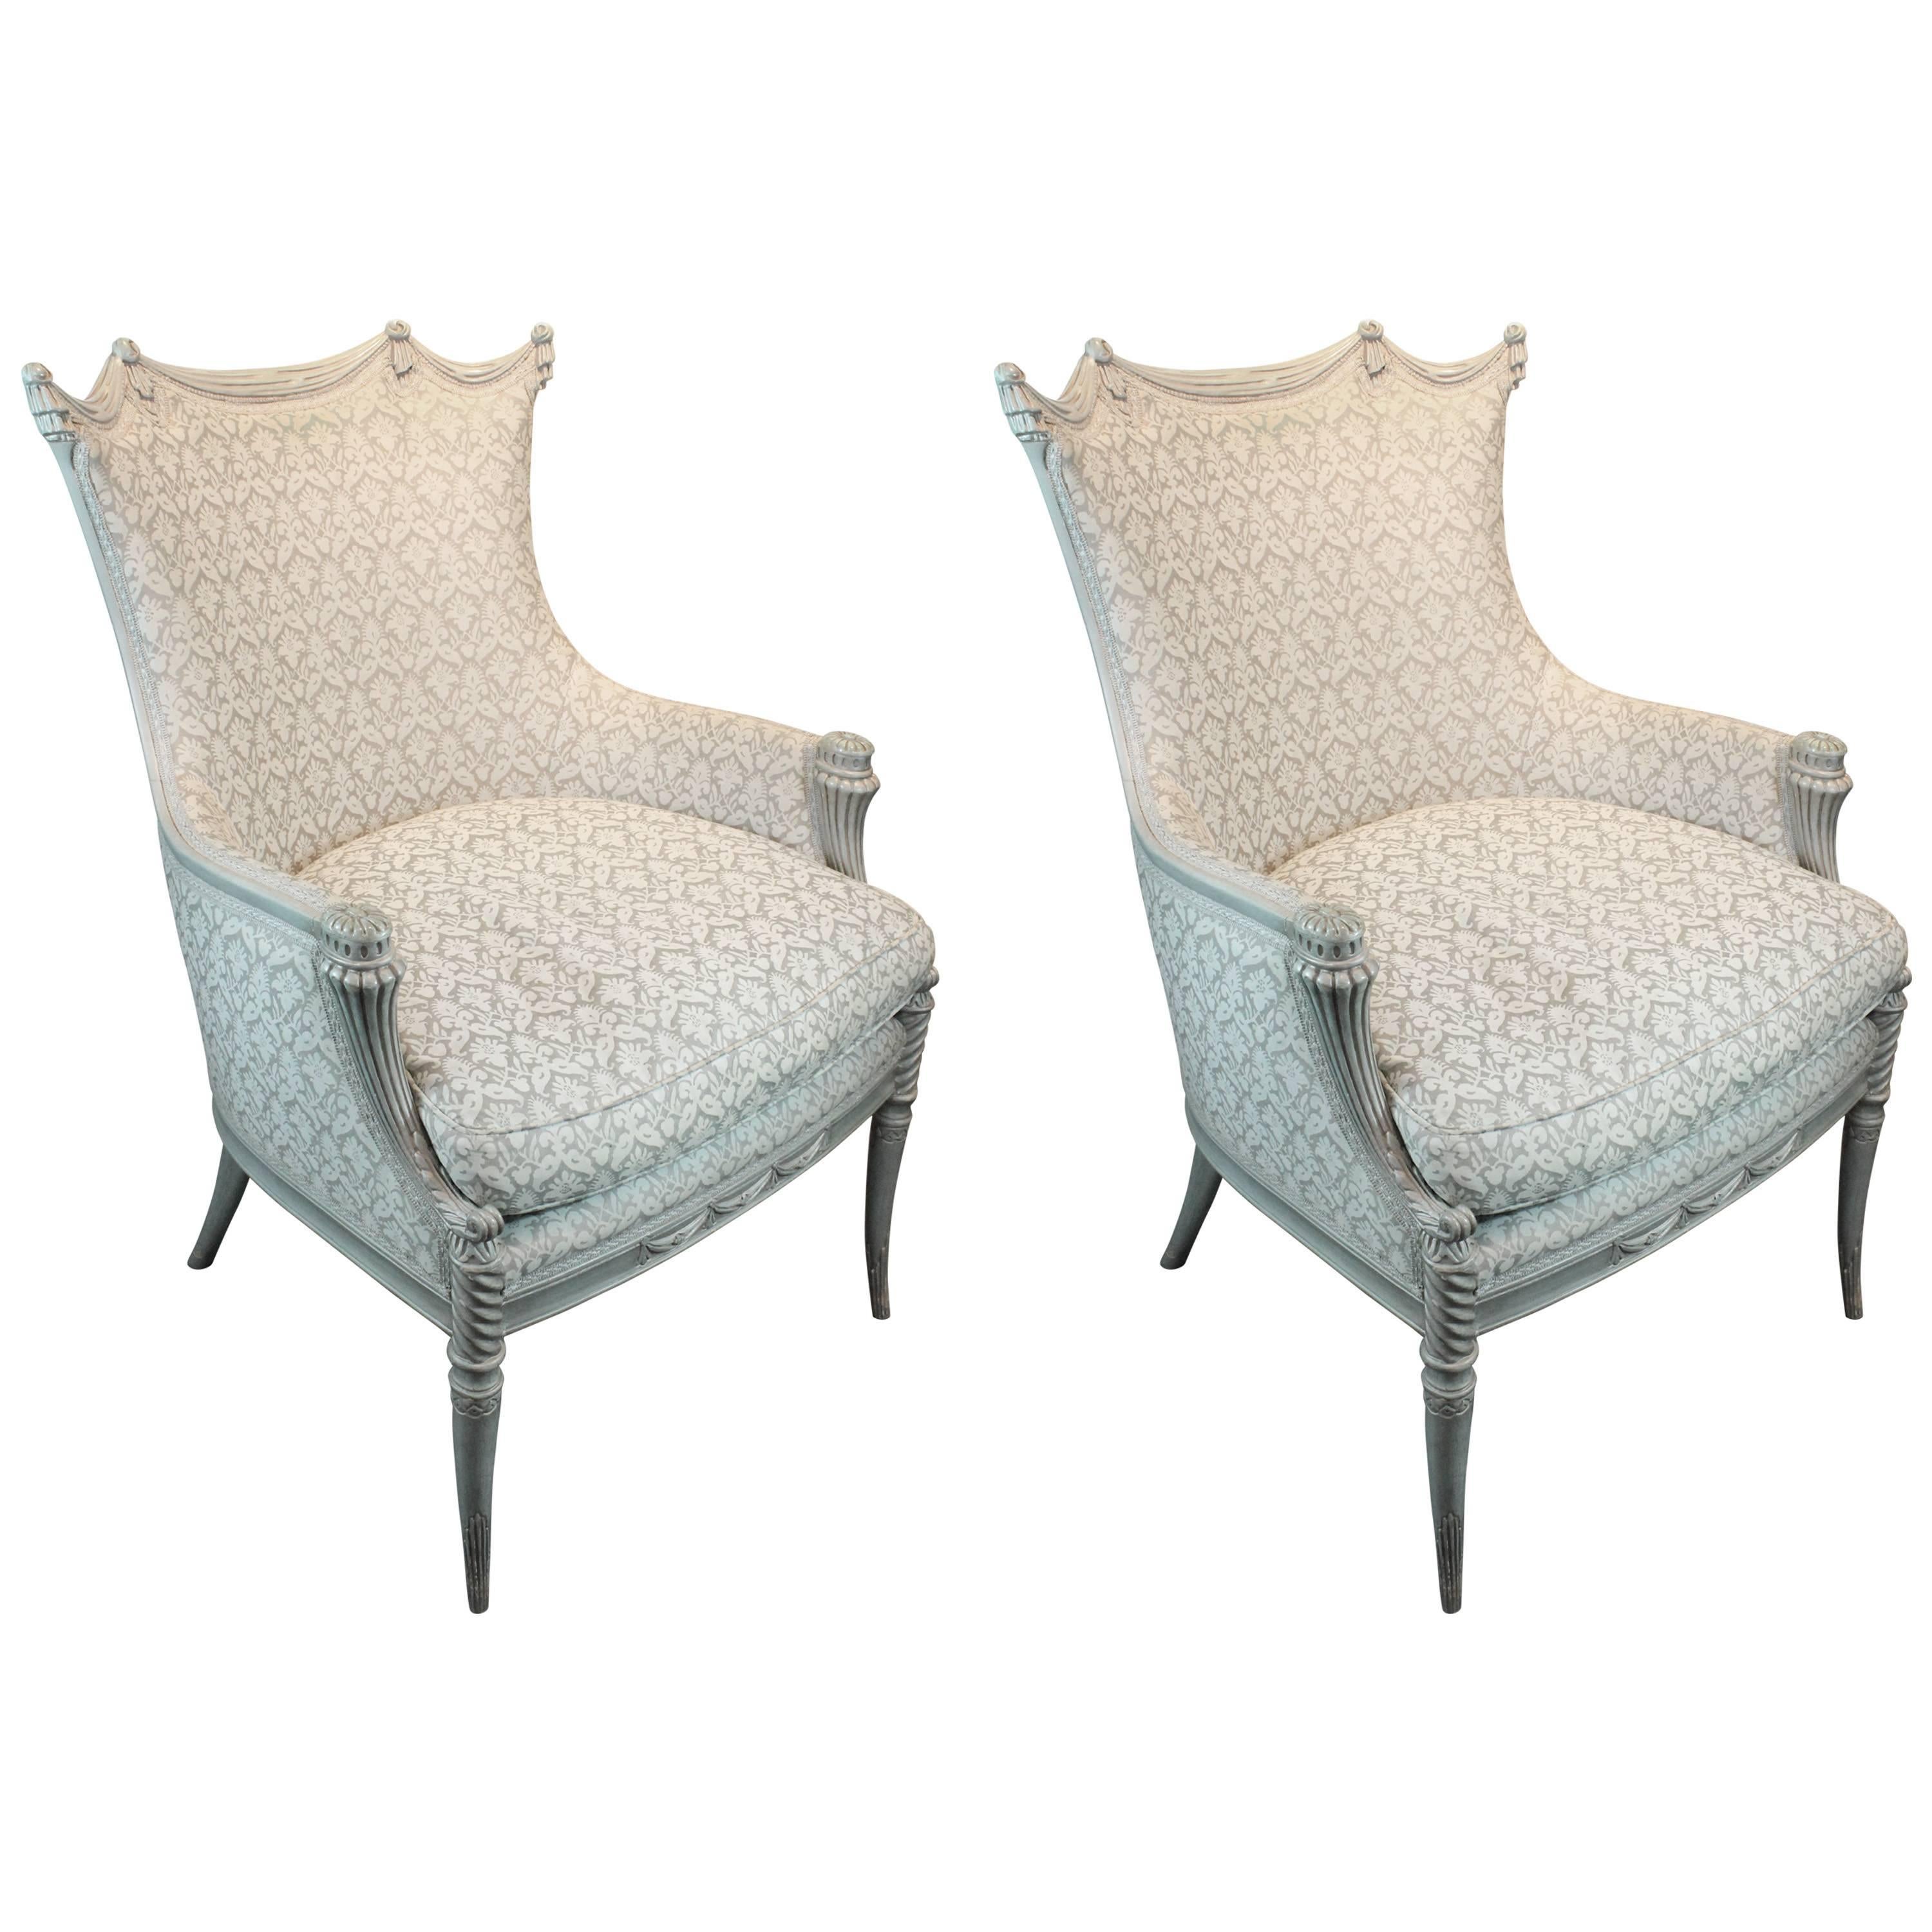 Pair of Carved and Painted Bergeres Upholstered in Fortuny Fabric